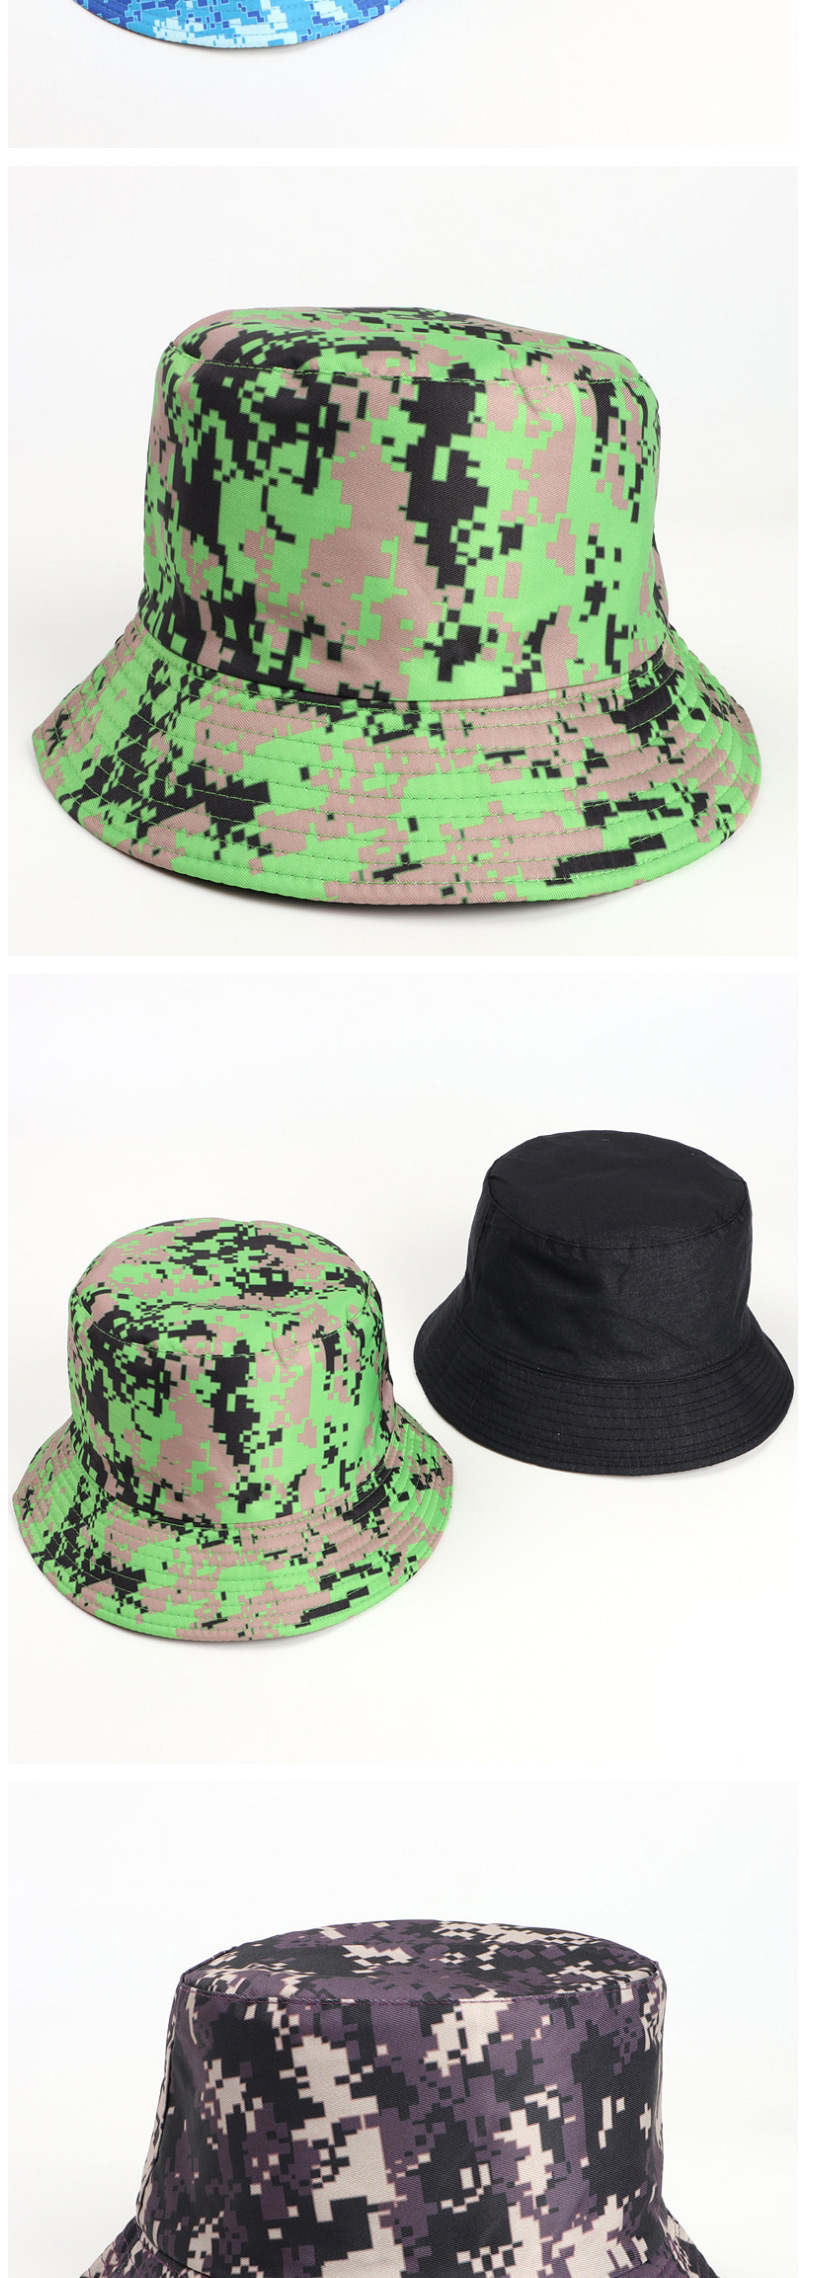 Fashion Digital Camouflage-purple Printed Double-sided Multicolor Camouflage Fisherman Hat,Sun Hats